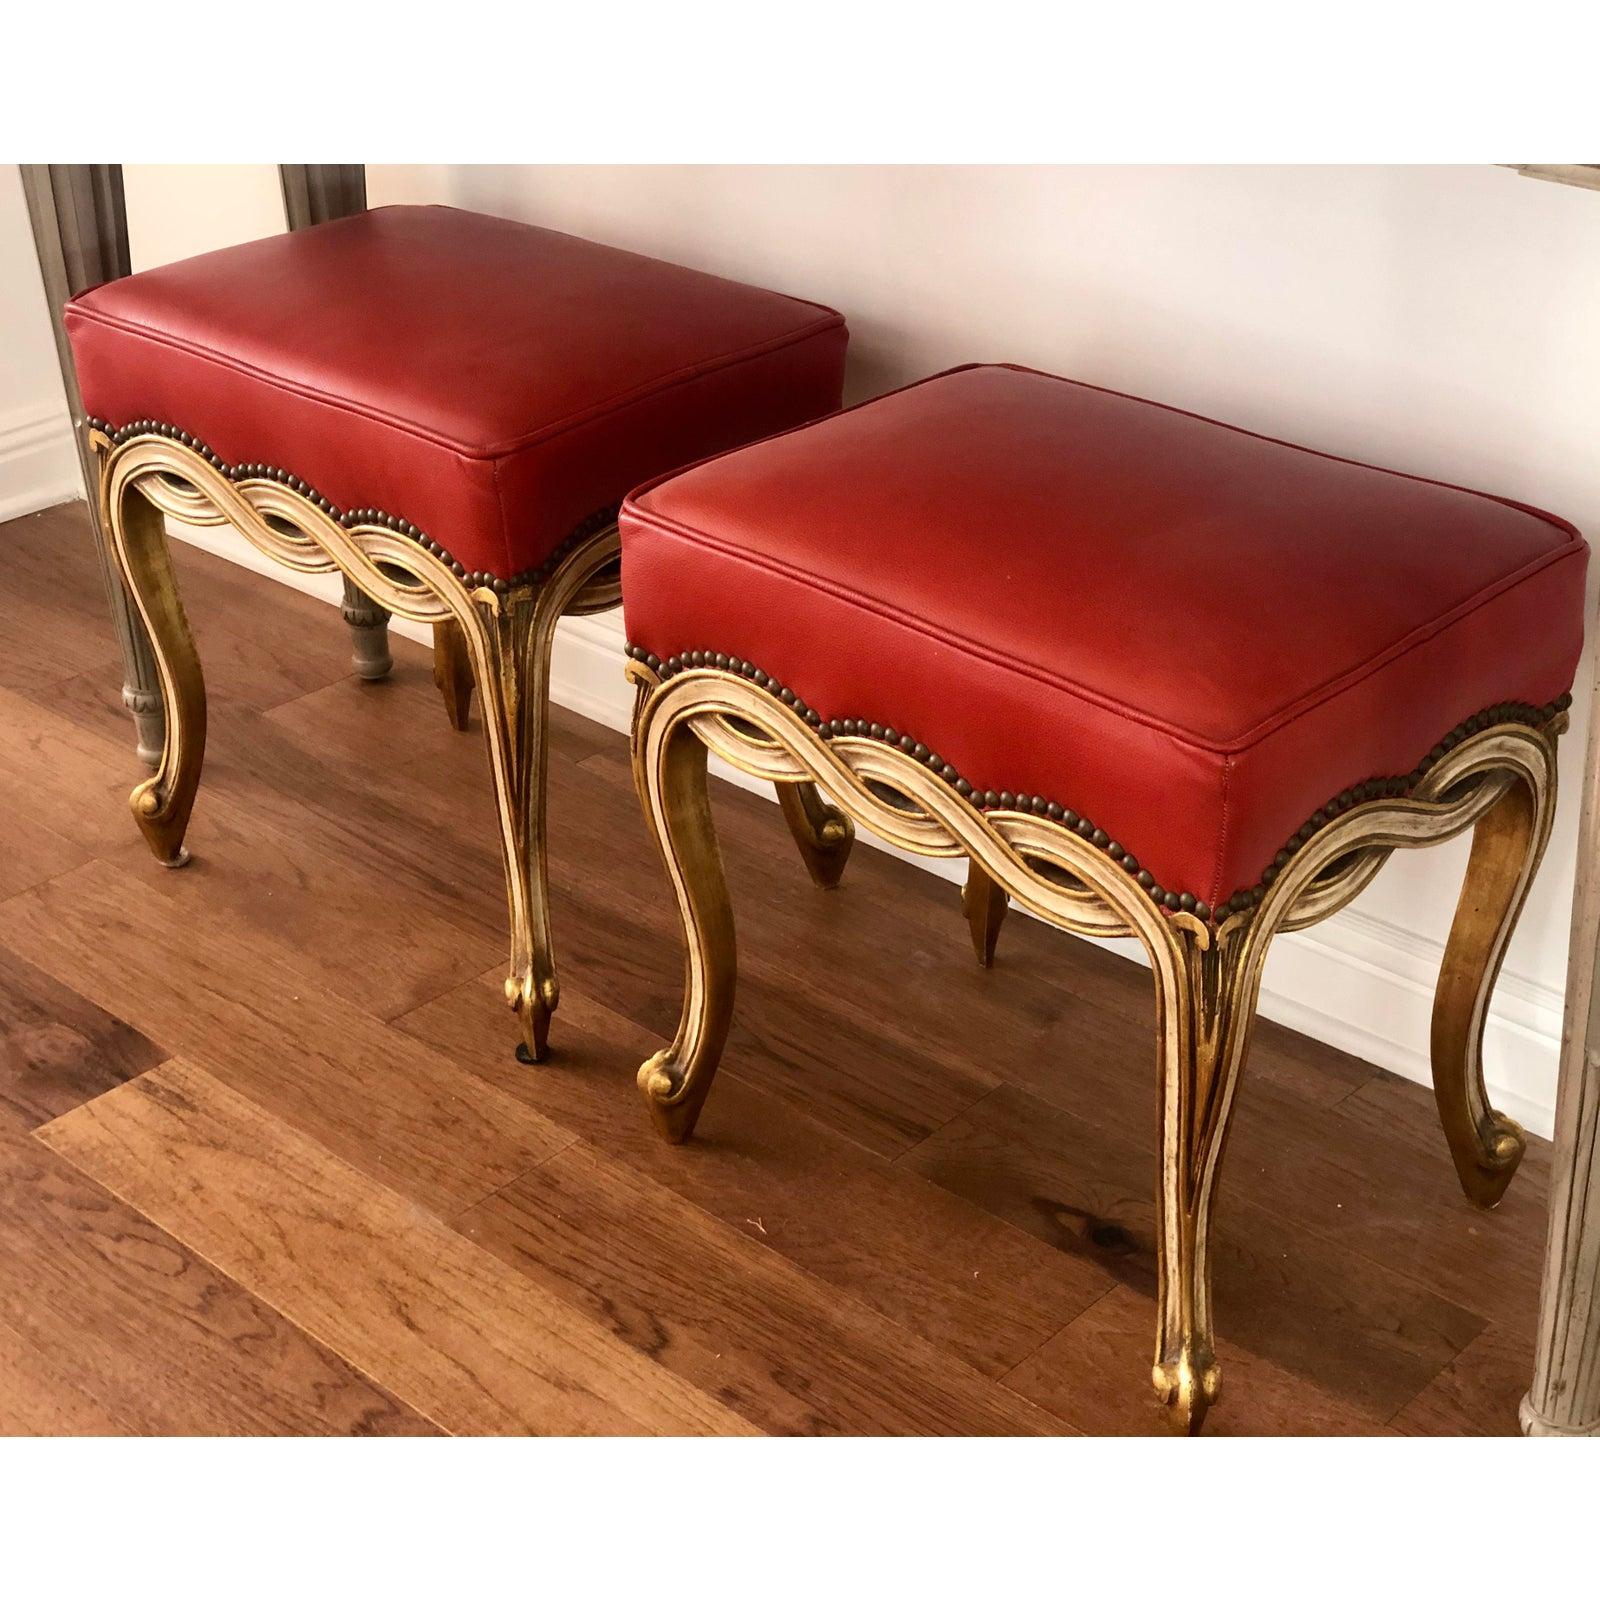 American Pair of Regency Style Giltwood Taboret Benches by Randy Esada Designs for Prospr For Sale